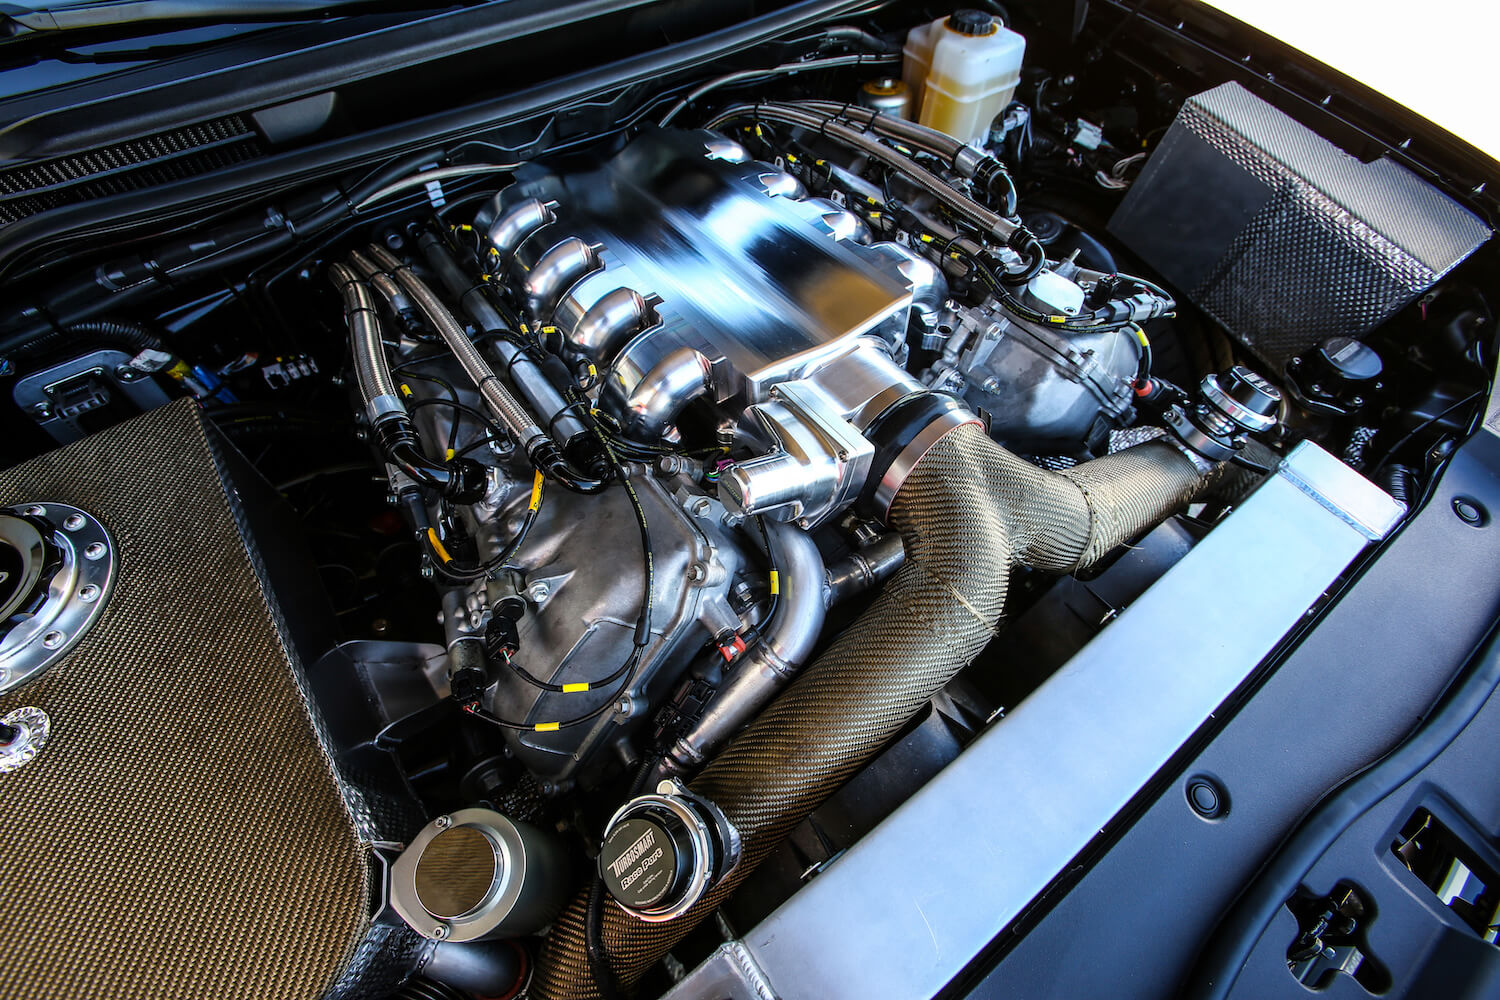 A tuned version of the Toyota 5.7-liter V8 engine prepped for racing.